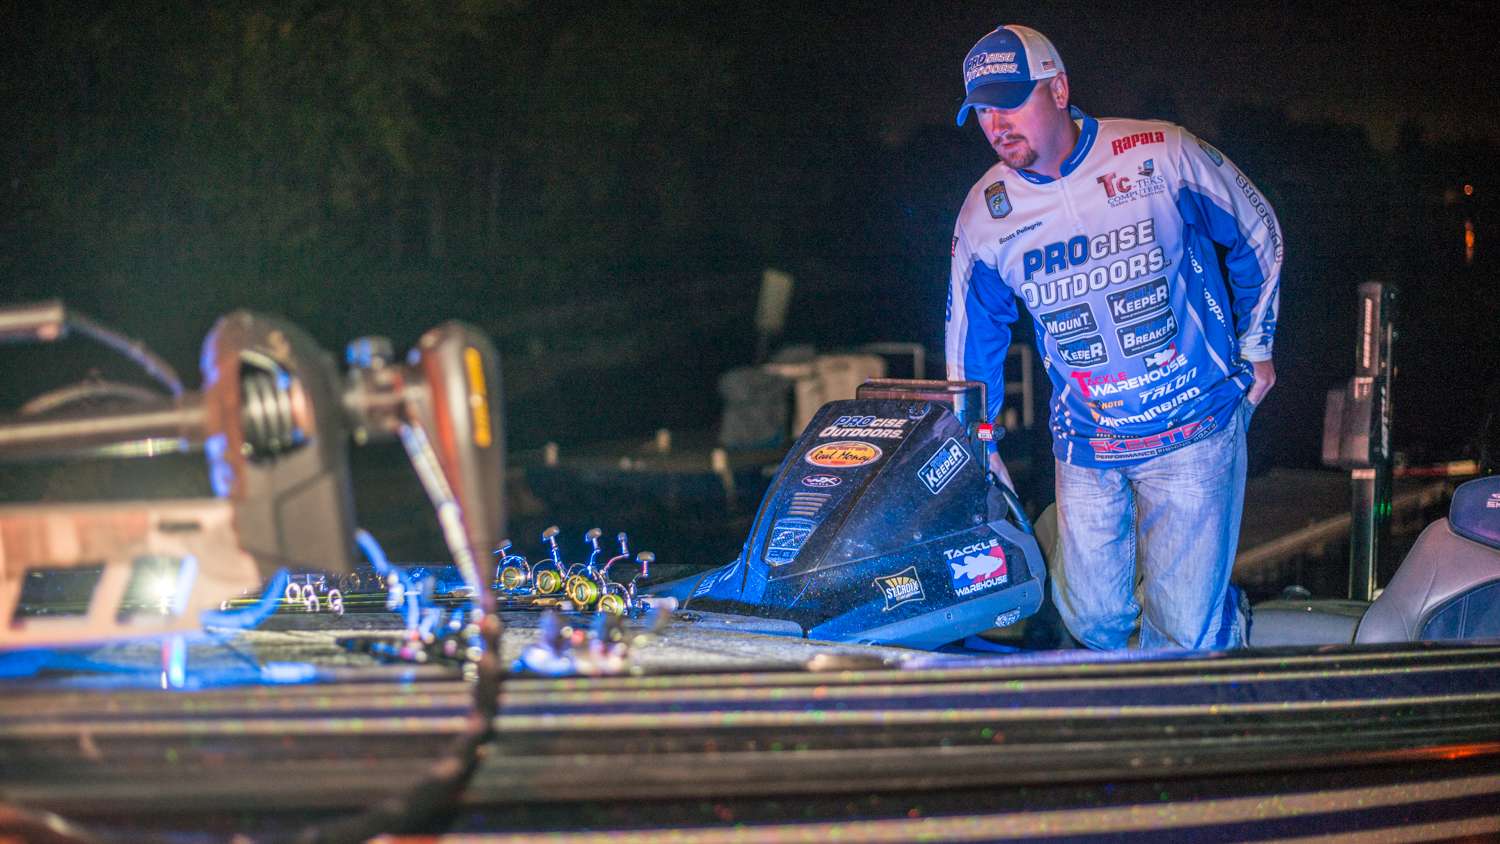 Scott Pellegrin, currently in 4th place with 19lbs 13oz, picks up his co angler and launches his boat. 